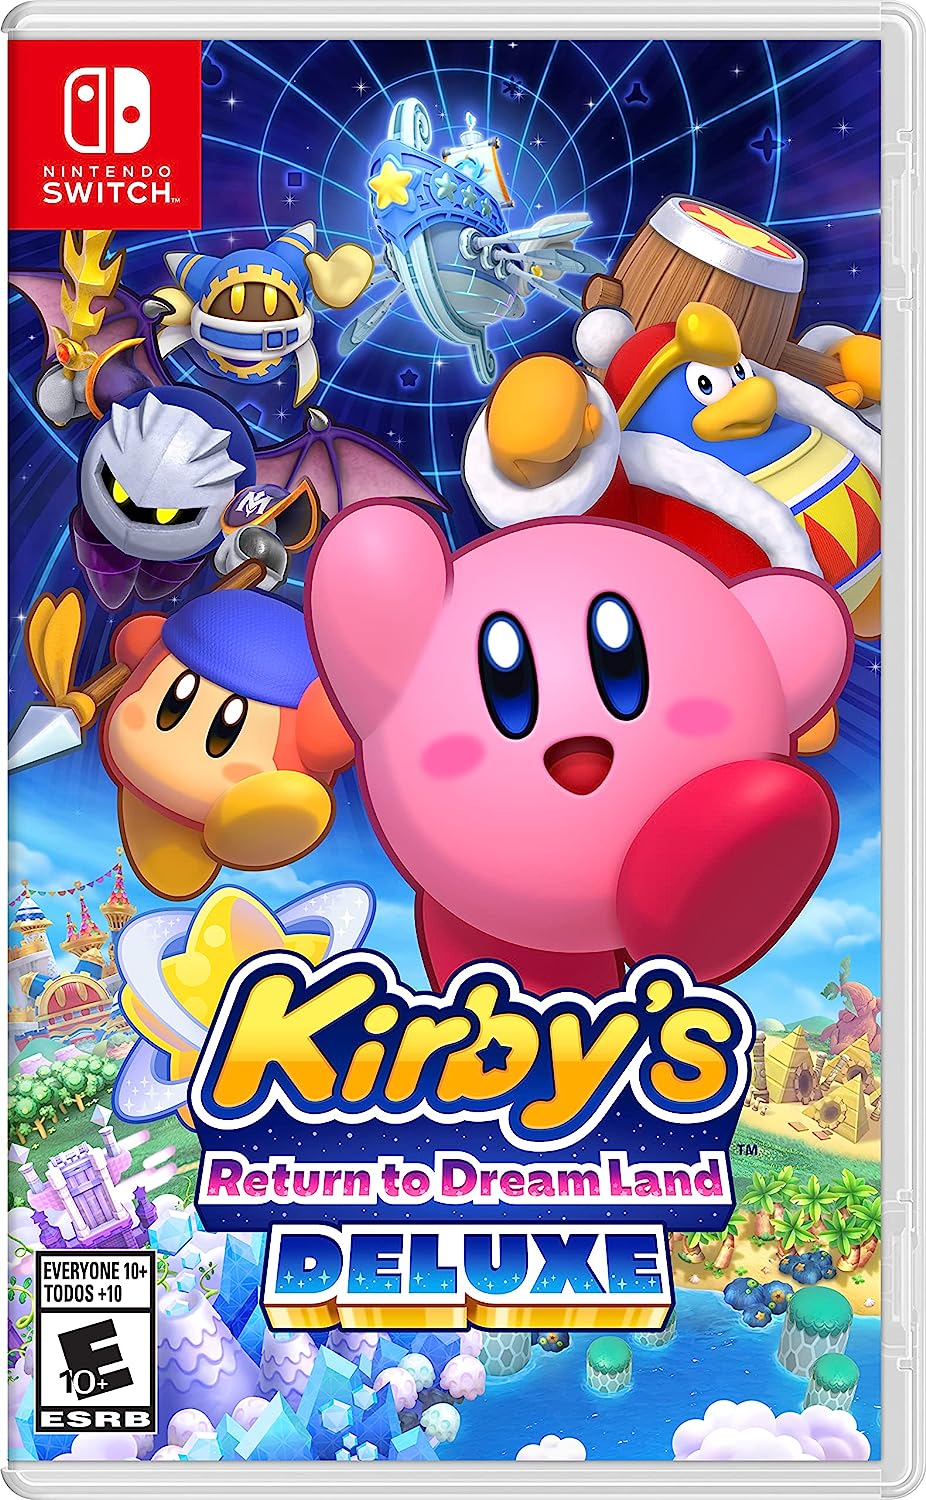 CLUB NINTENDO KIRBY Wii Music Selection SOUNDTRACK Game CD Kirby's Dream  Land